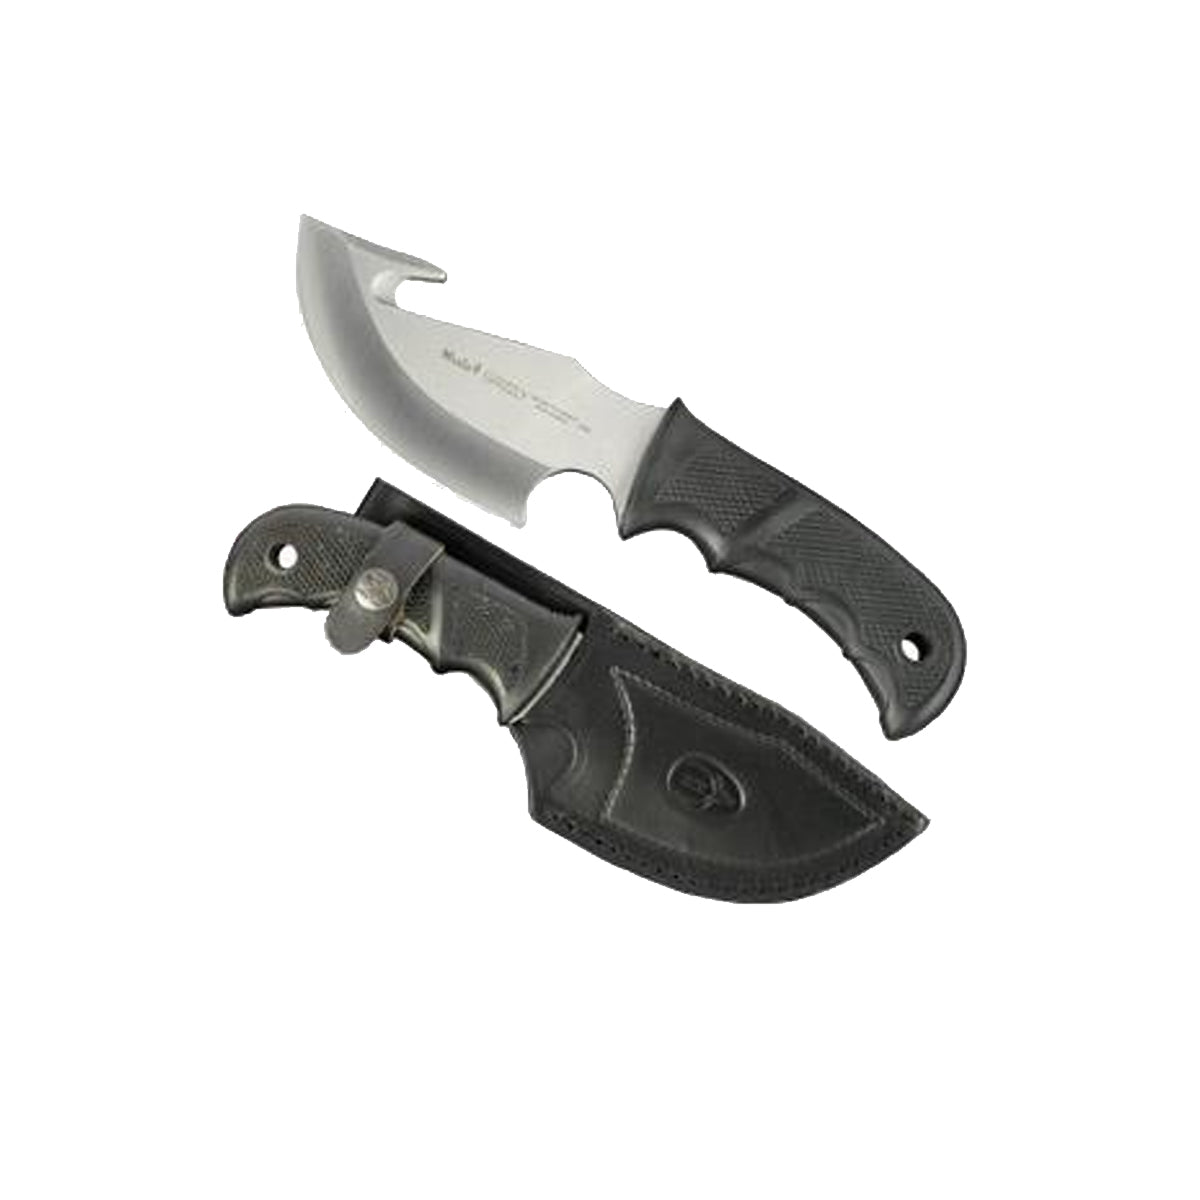 Muela | Grizzly 12G - Black Handle Knife